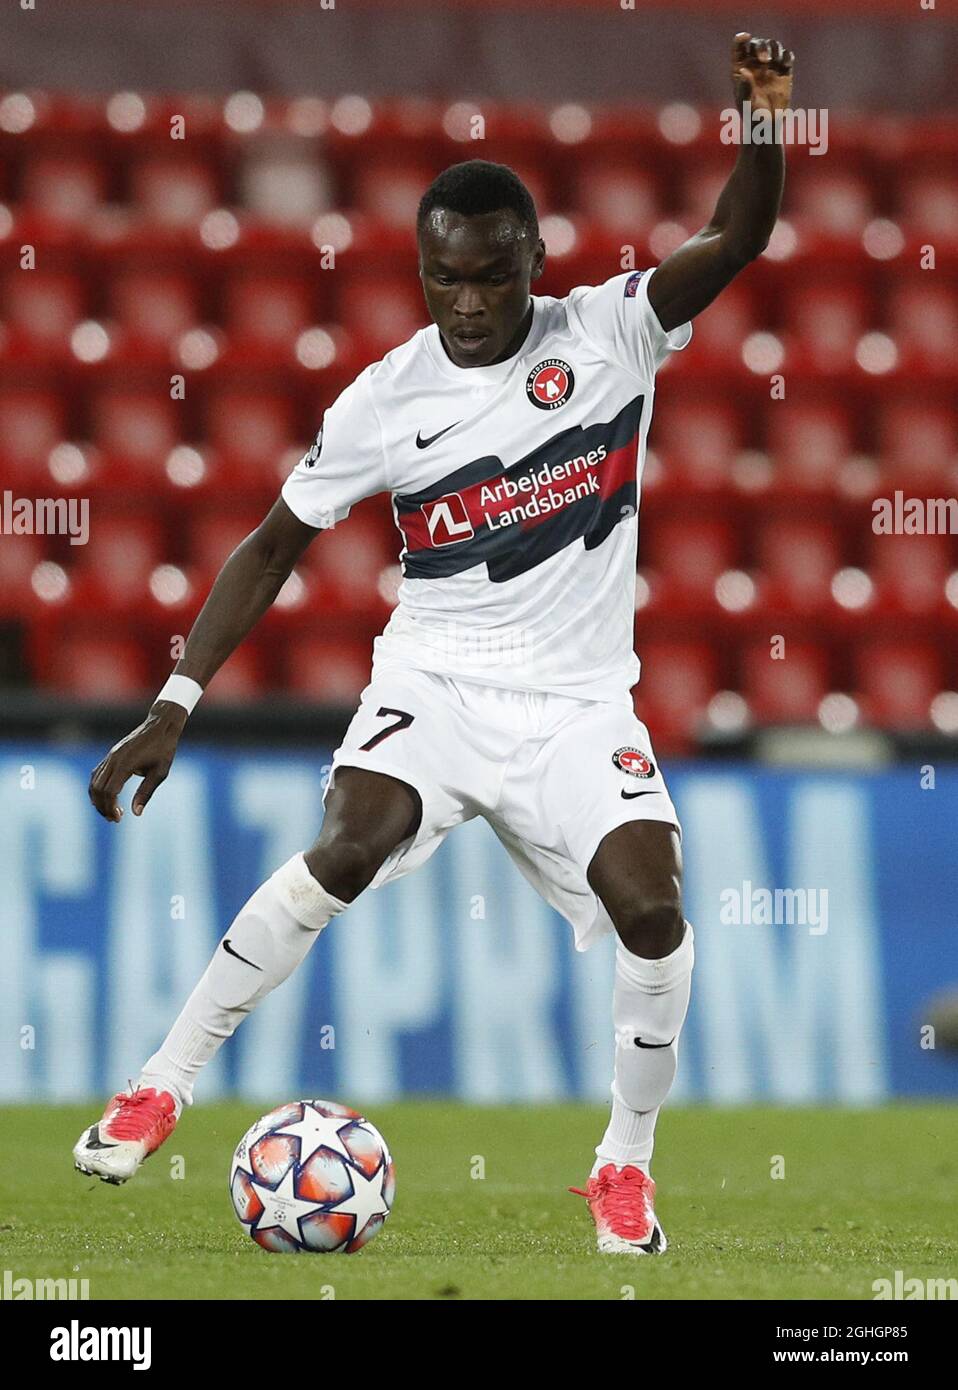 Pione Sisto of FC Midtjylland during the UEFA Champions League match at Anfield, Liverpool. Picture date: 27th October 2020. Picture credit should read: Darren Staples/Sportimage via PA Images Stock Photo